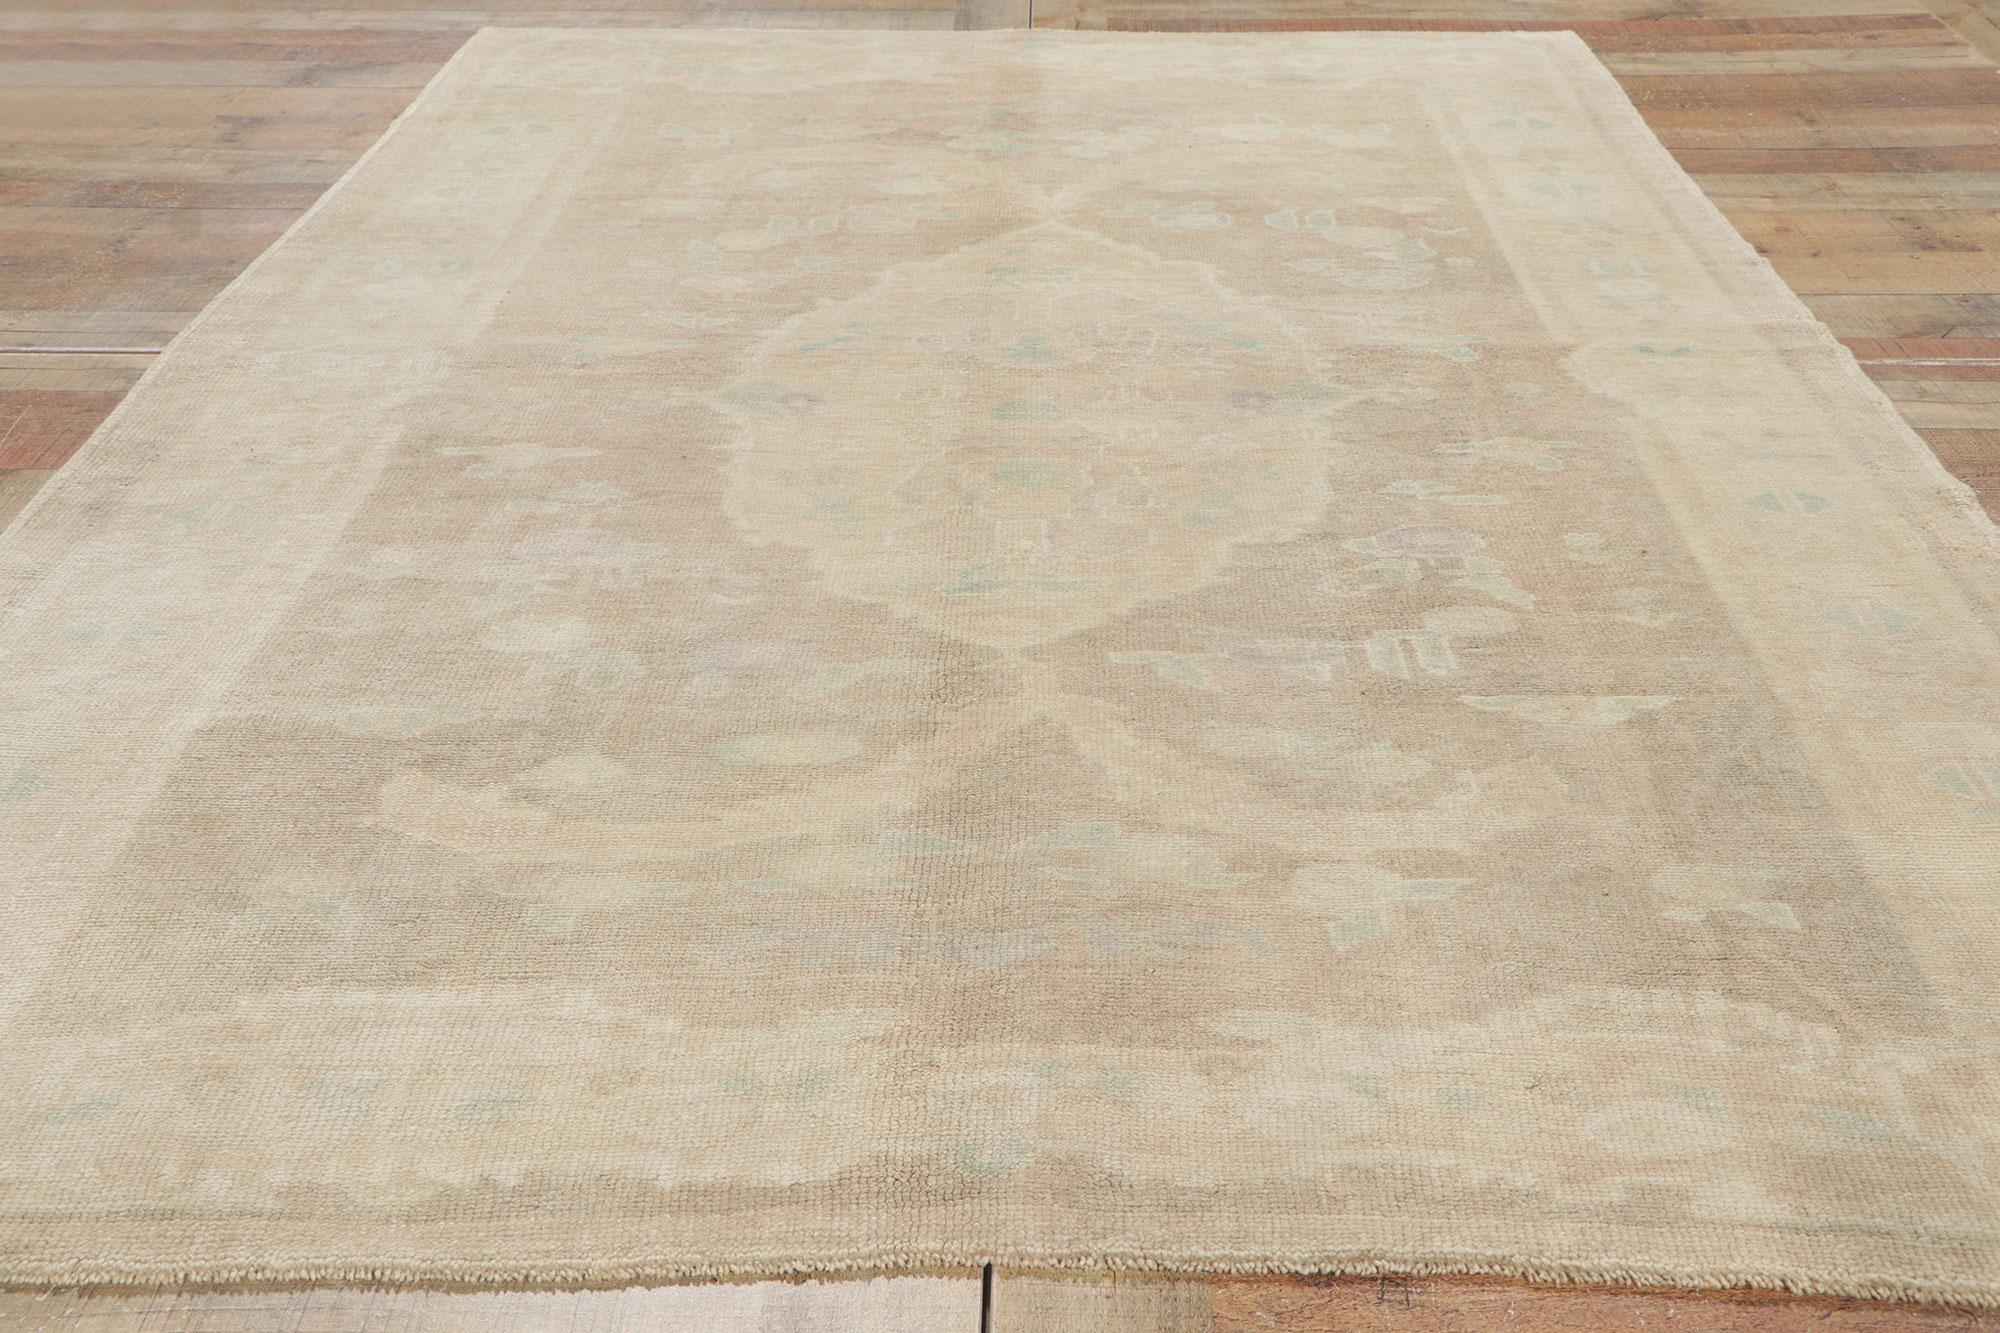 Vintage Turkish Oushak Rug with Faded Soft Earth-Tone Colors For Sale 2